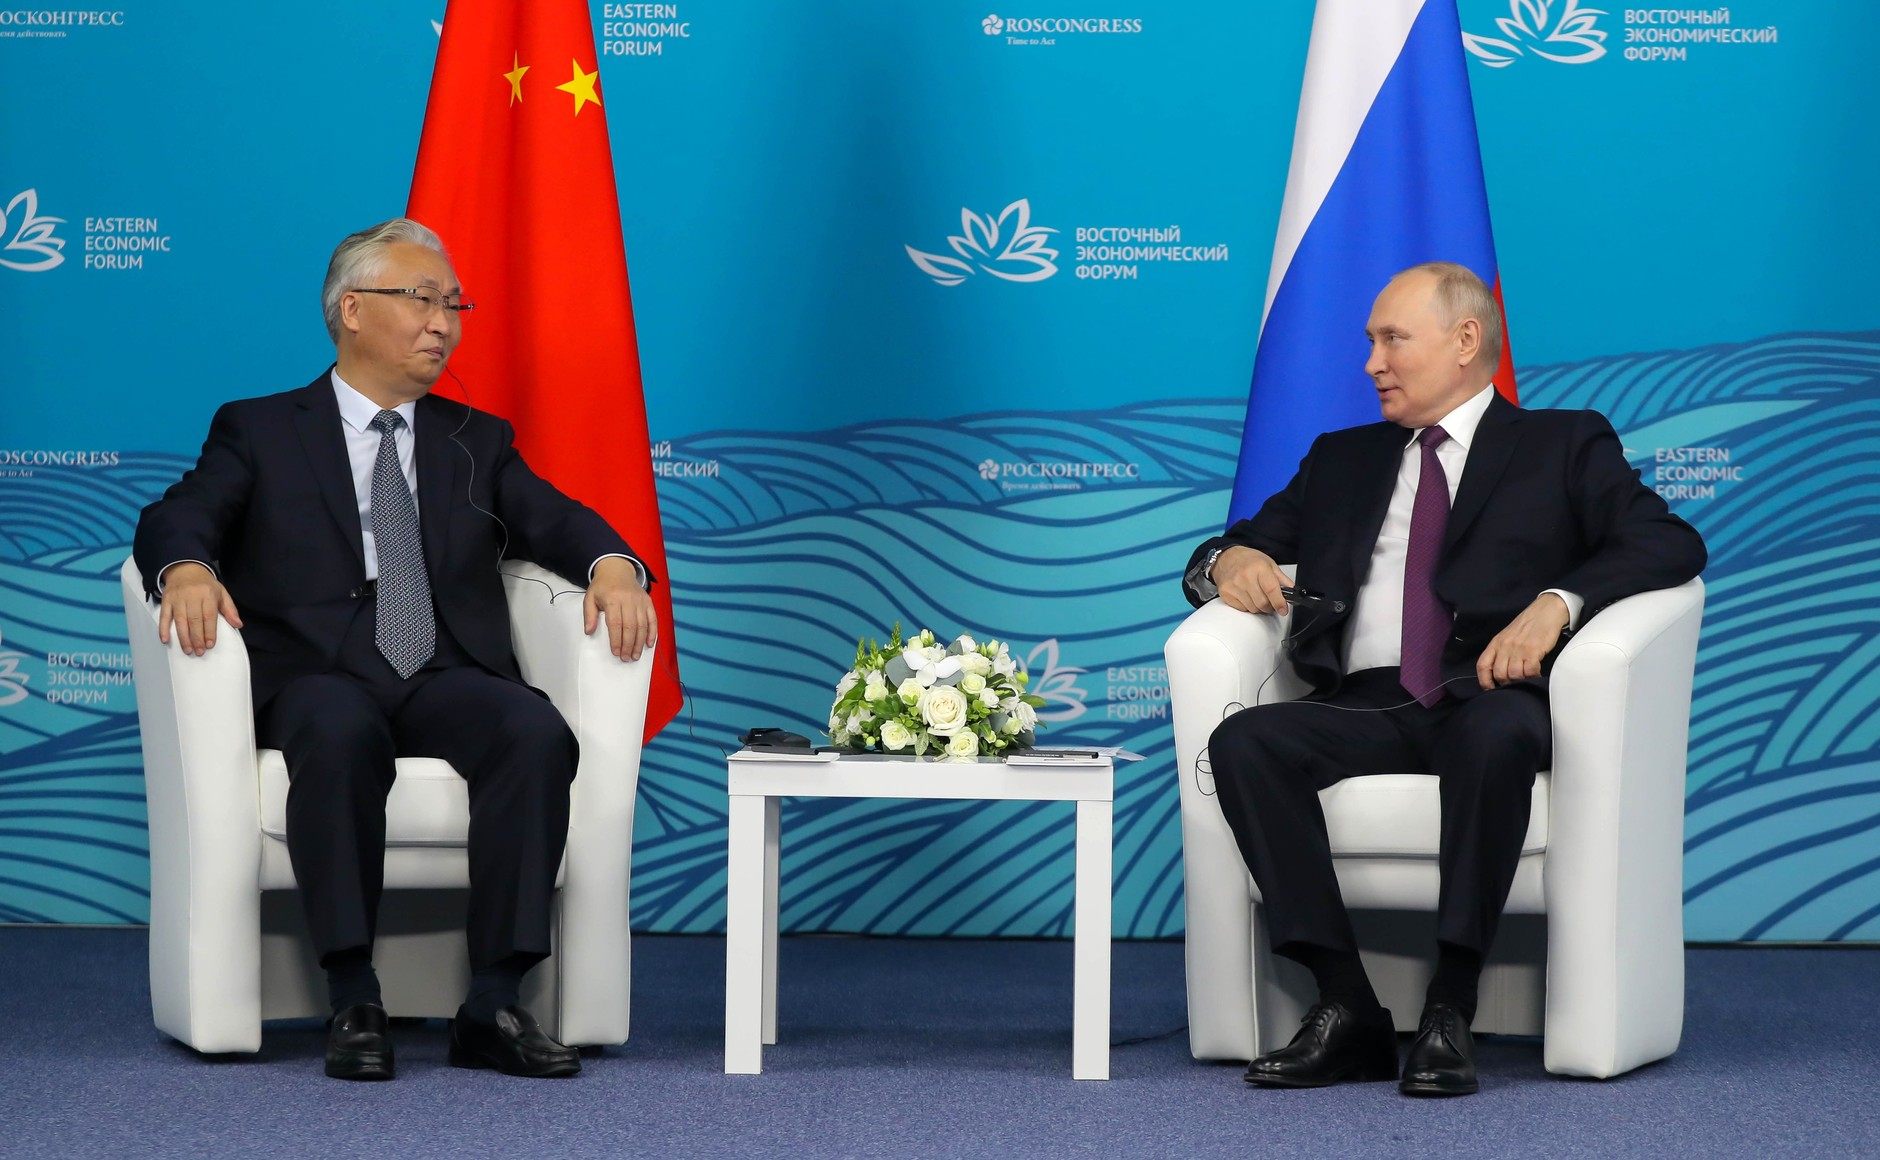 Russian President Vladimir Putin (right) holds talks with Chinese Vice-Premier Zhang Guoqing  on the sidelines of the Eastern Economic Forum in Vladivostok on Tuesday. Photo: Kremlin/dpa